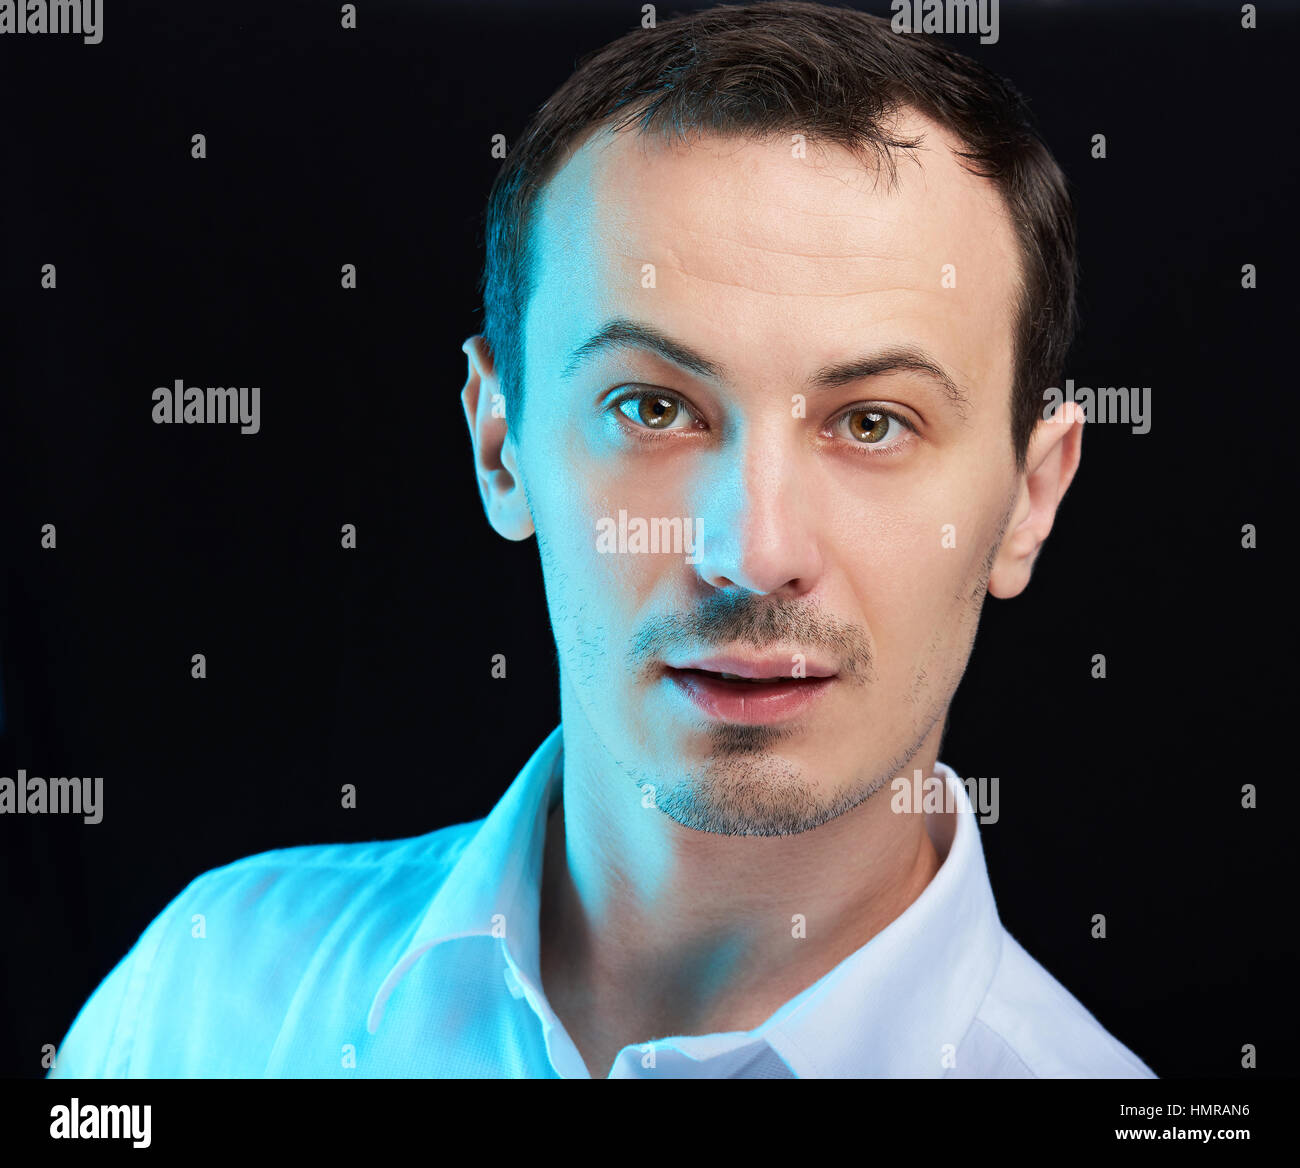 close up portrait  of young white man on black Stock Photo